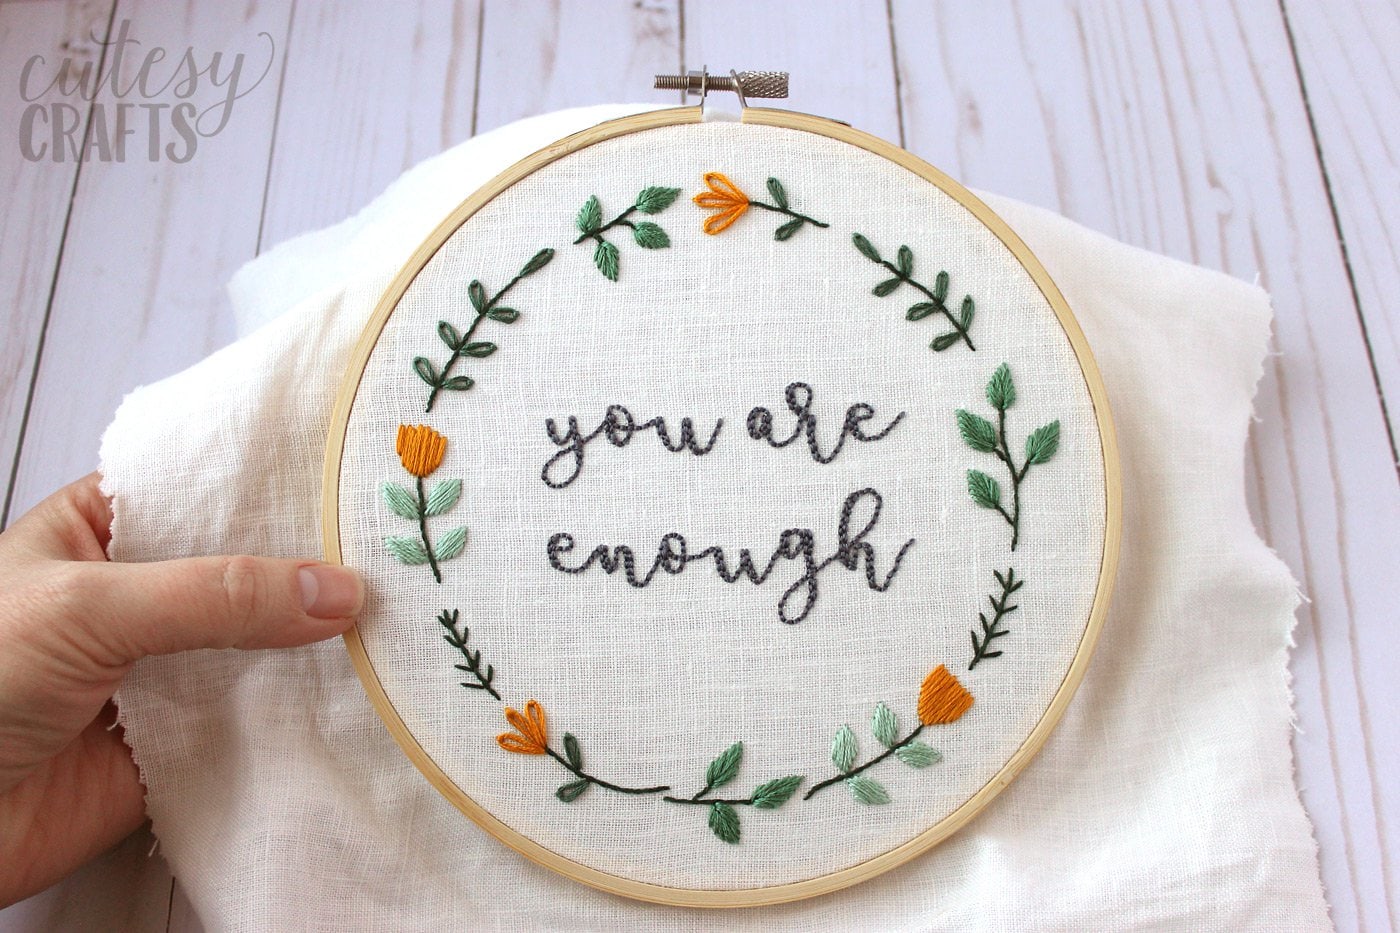 Free Hand Embroidery Pattern for an inspirational quote embroidery hoop - "you are enough" - #embroidery #handEmbroidery #embroiderystitches #embroiderypattern 